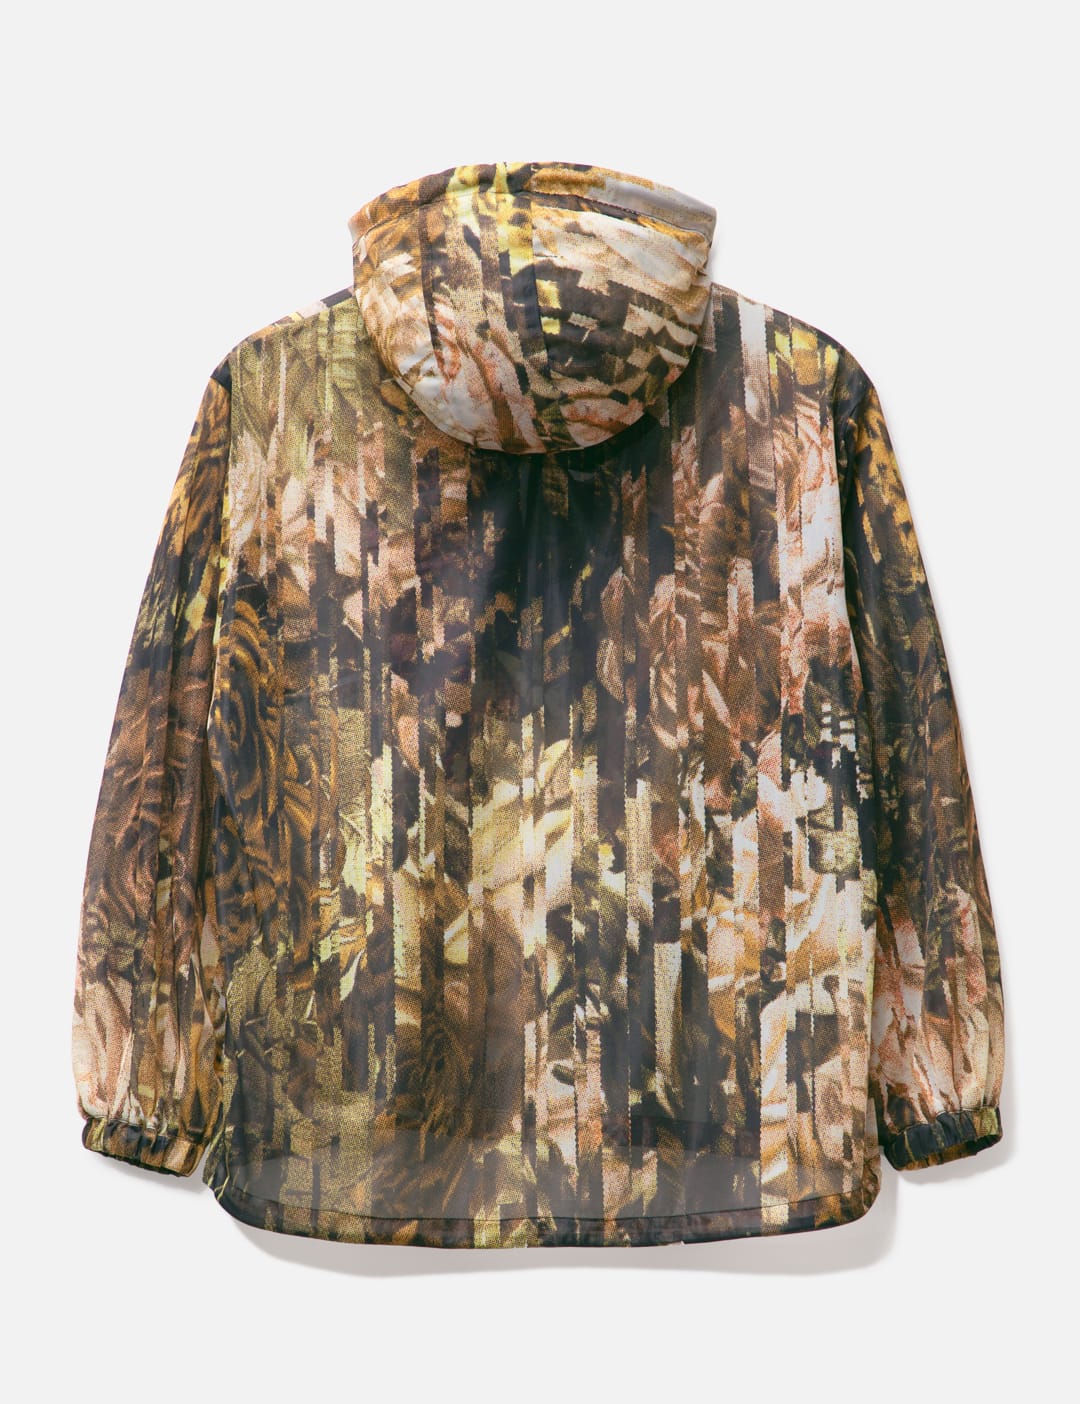 TIGHTBOOTH   FLOWER CAMO MESH ANORAK   HBX   Globally Curated